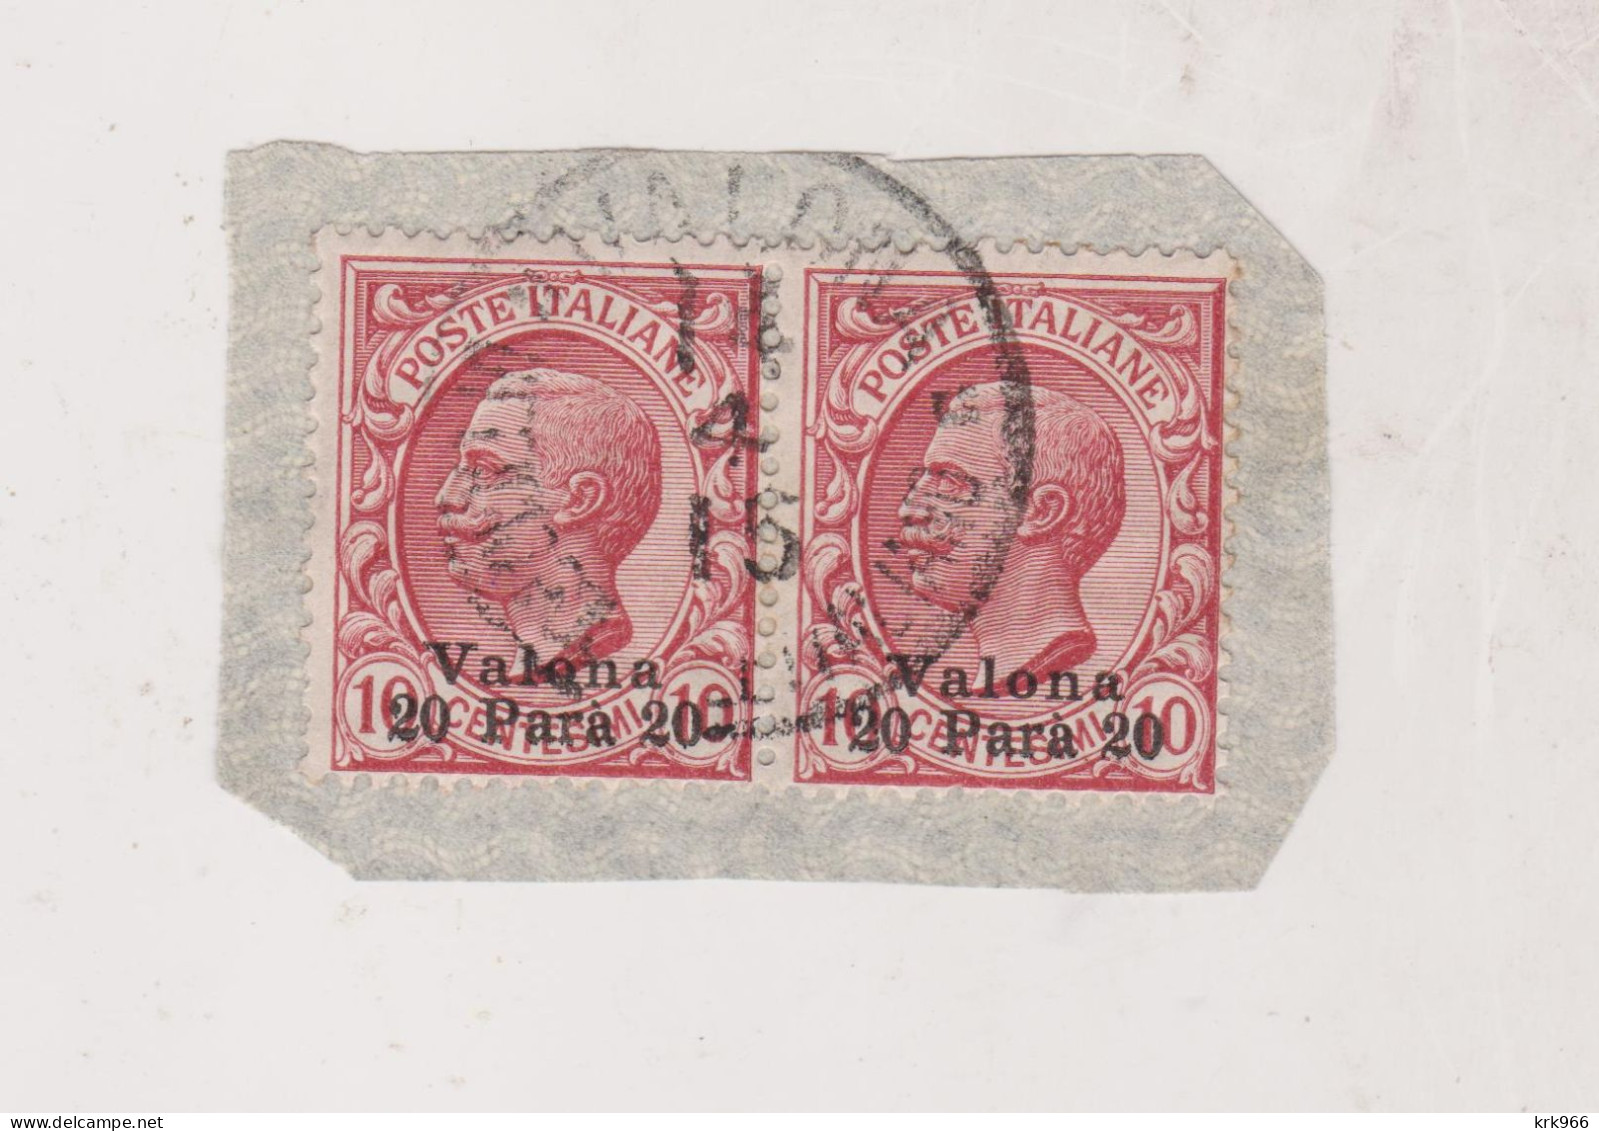 ITALY  ALBANIA VALONA Nice Stamps Used On Piece - Albanien